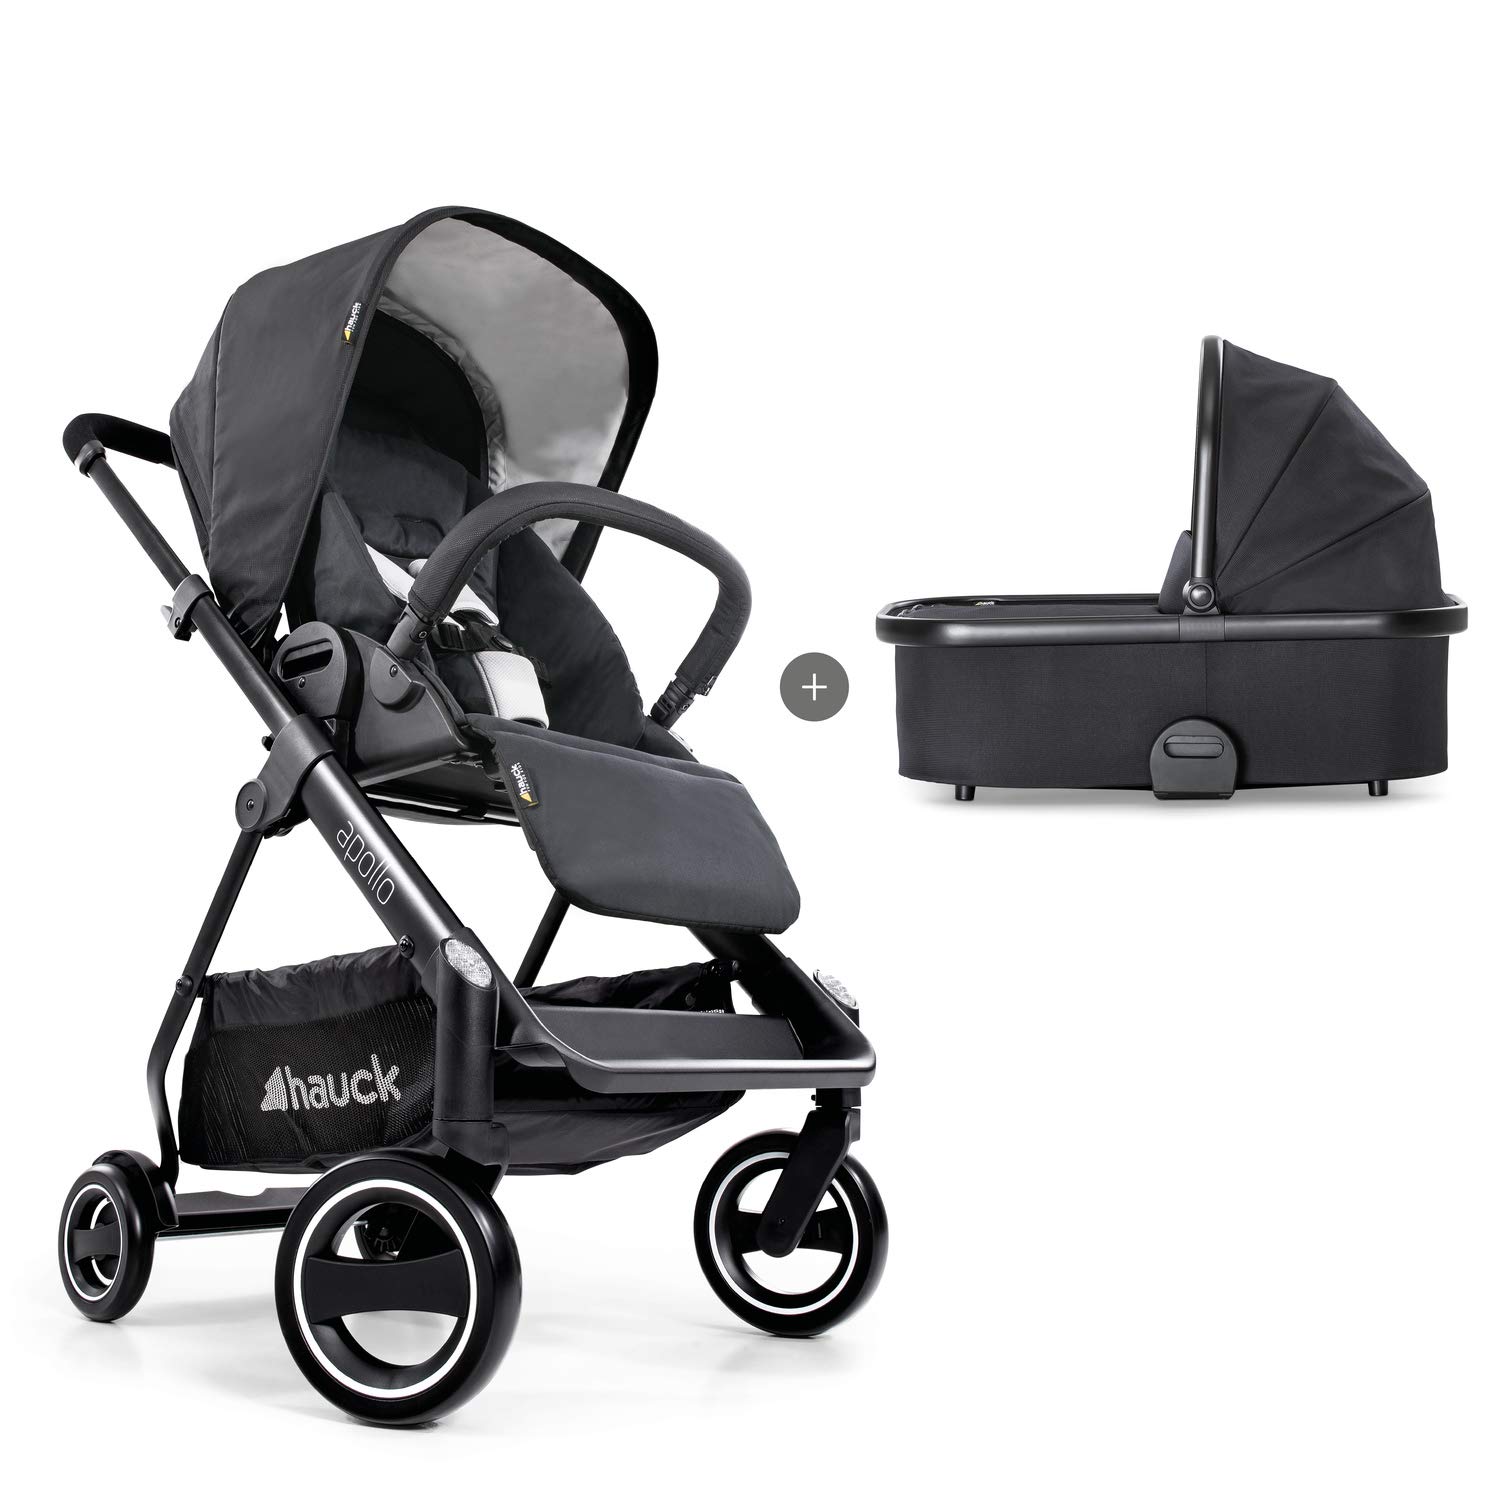 Hauck Apollo Duoset Pushchair + Leg Cover + Baby Tub Rotatable up to 25 kg Reflectors Height Adjustable Push Handle Compact Foldable Car Seat Compatible Black